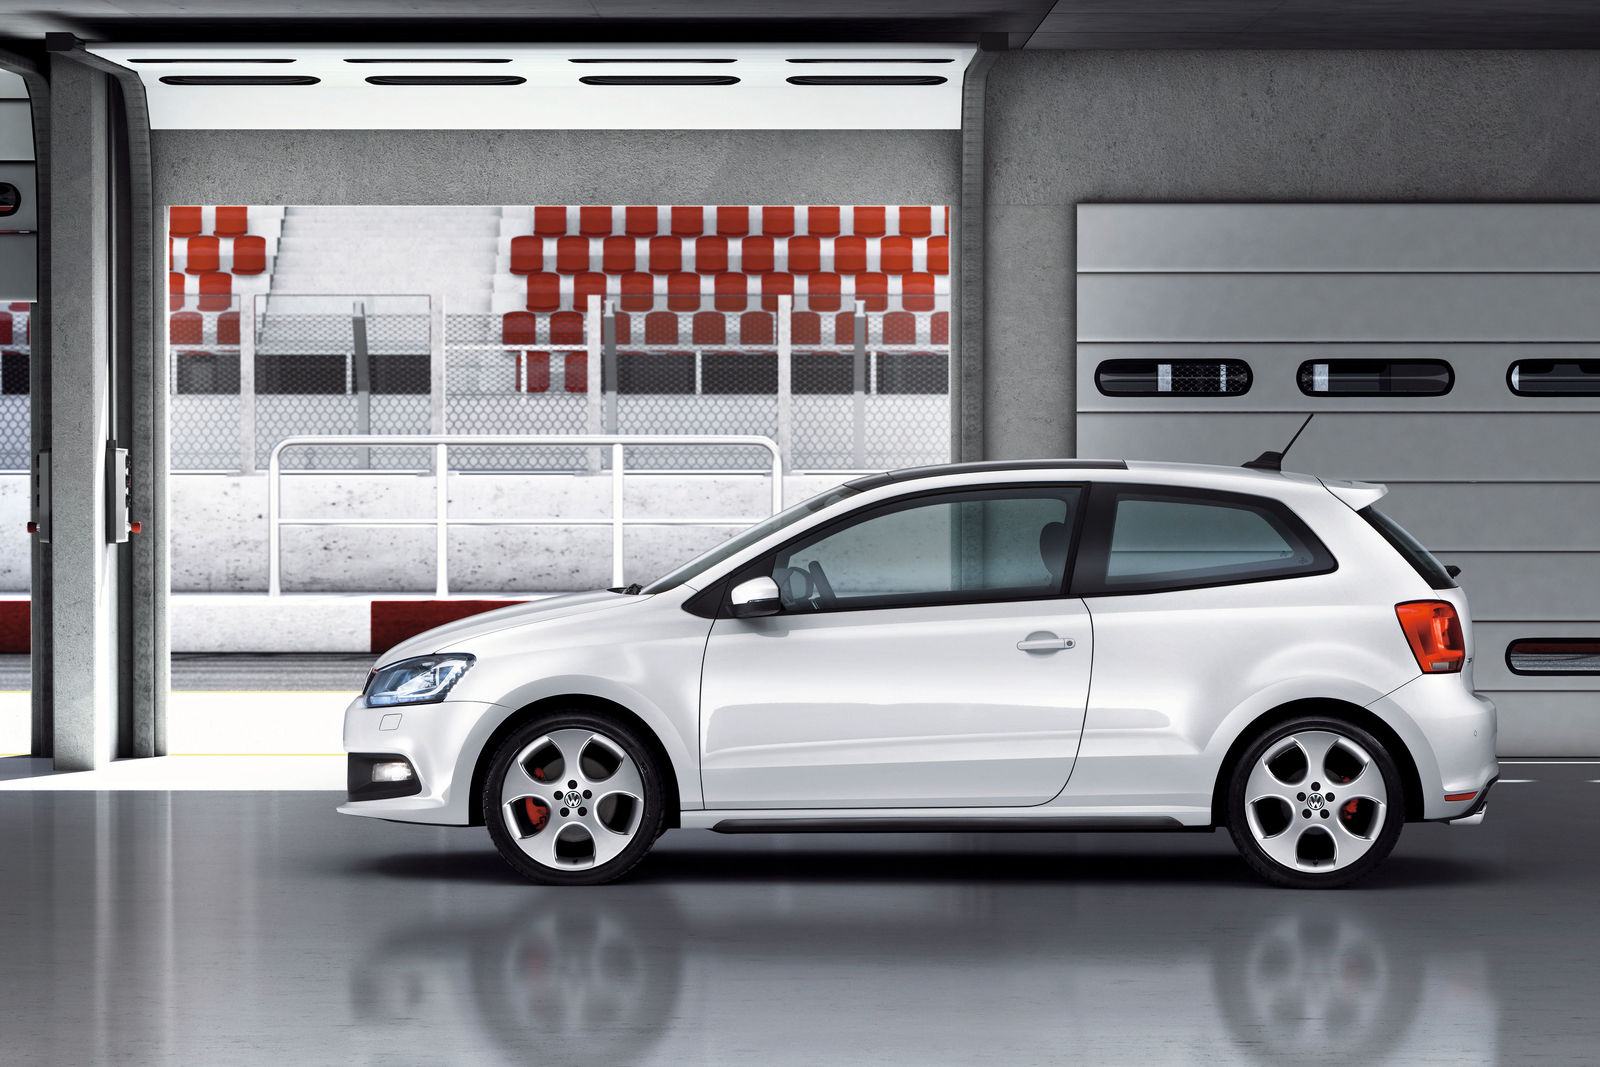 The new Polo GTI: A modern sports car in the best tradition